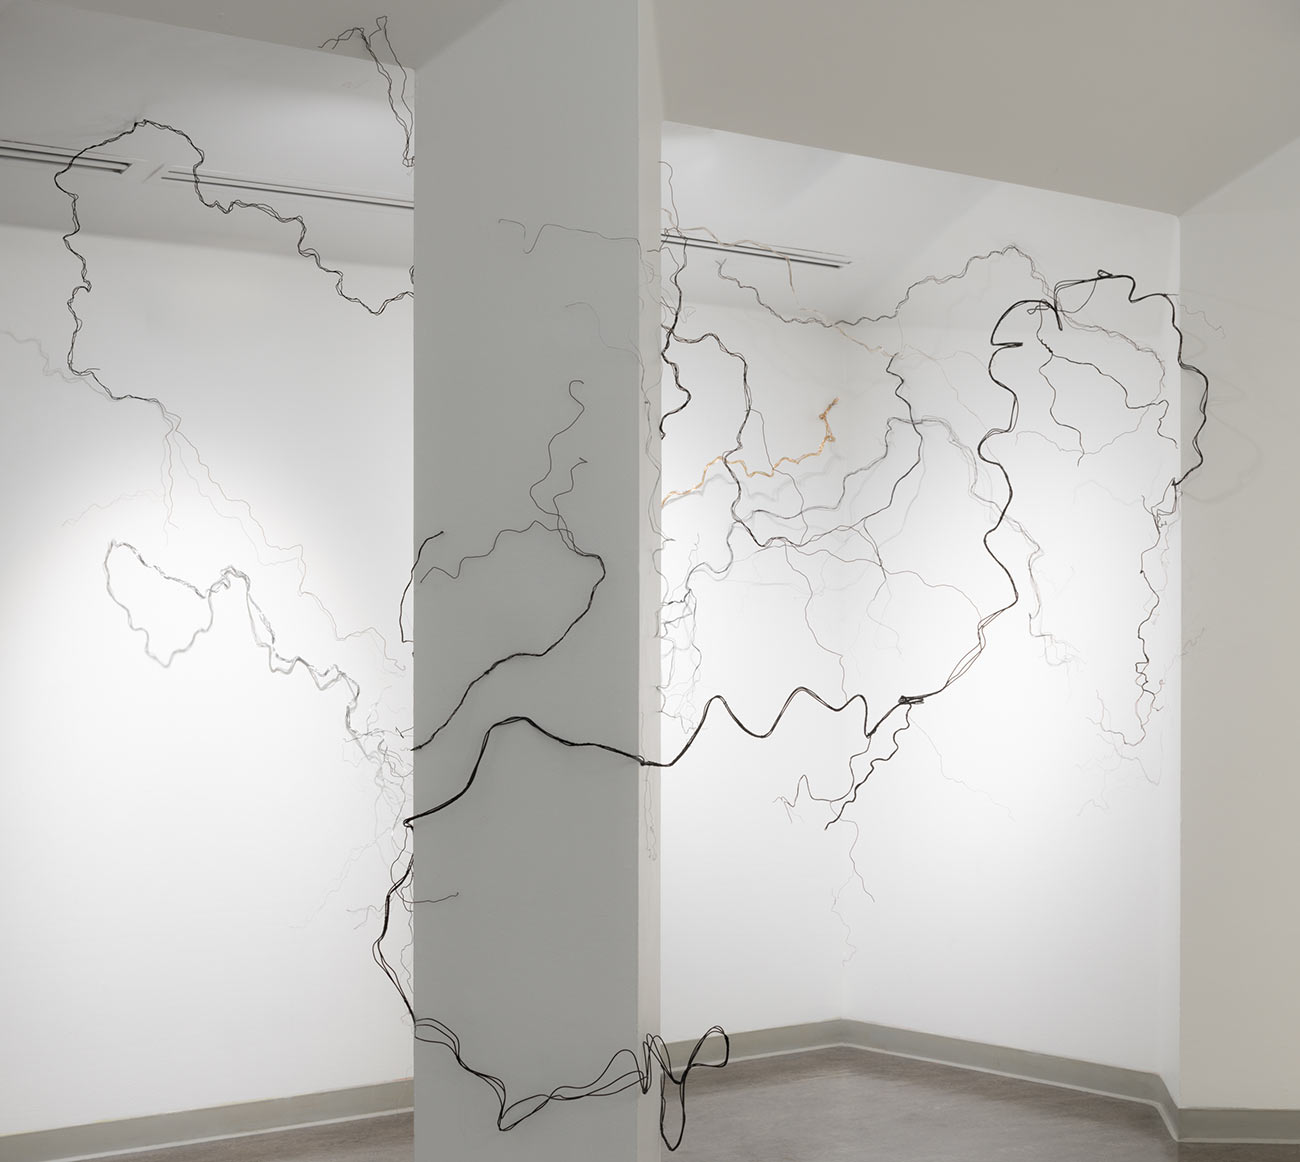 Photo of artwork by SU student Marguerite Pilon installed in the Vachon Gallery